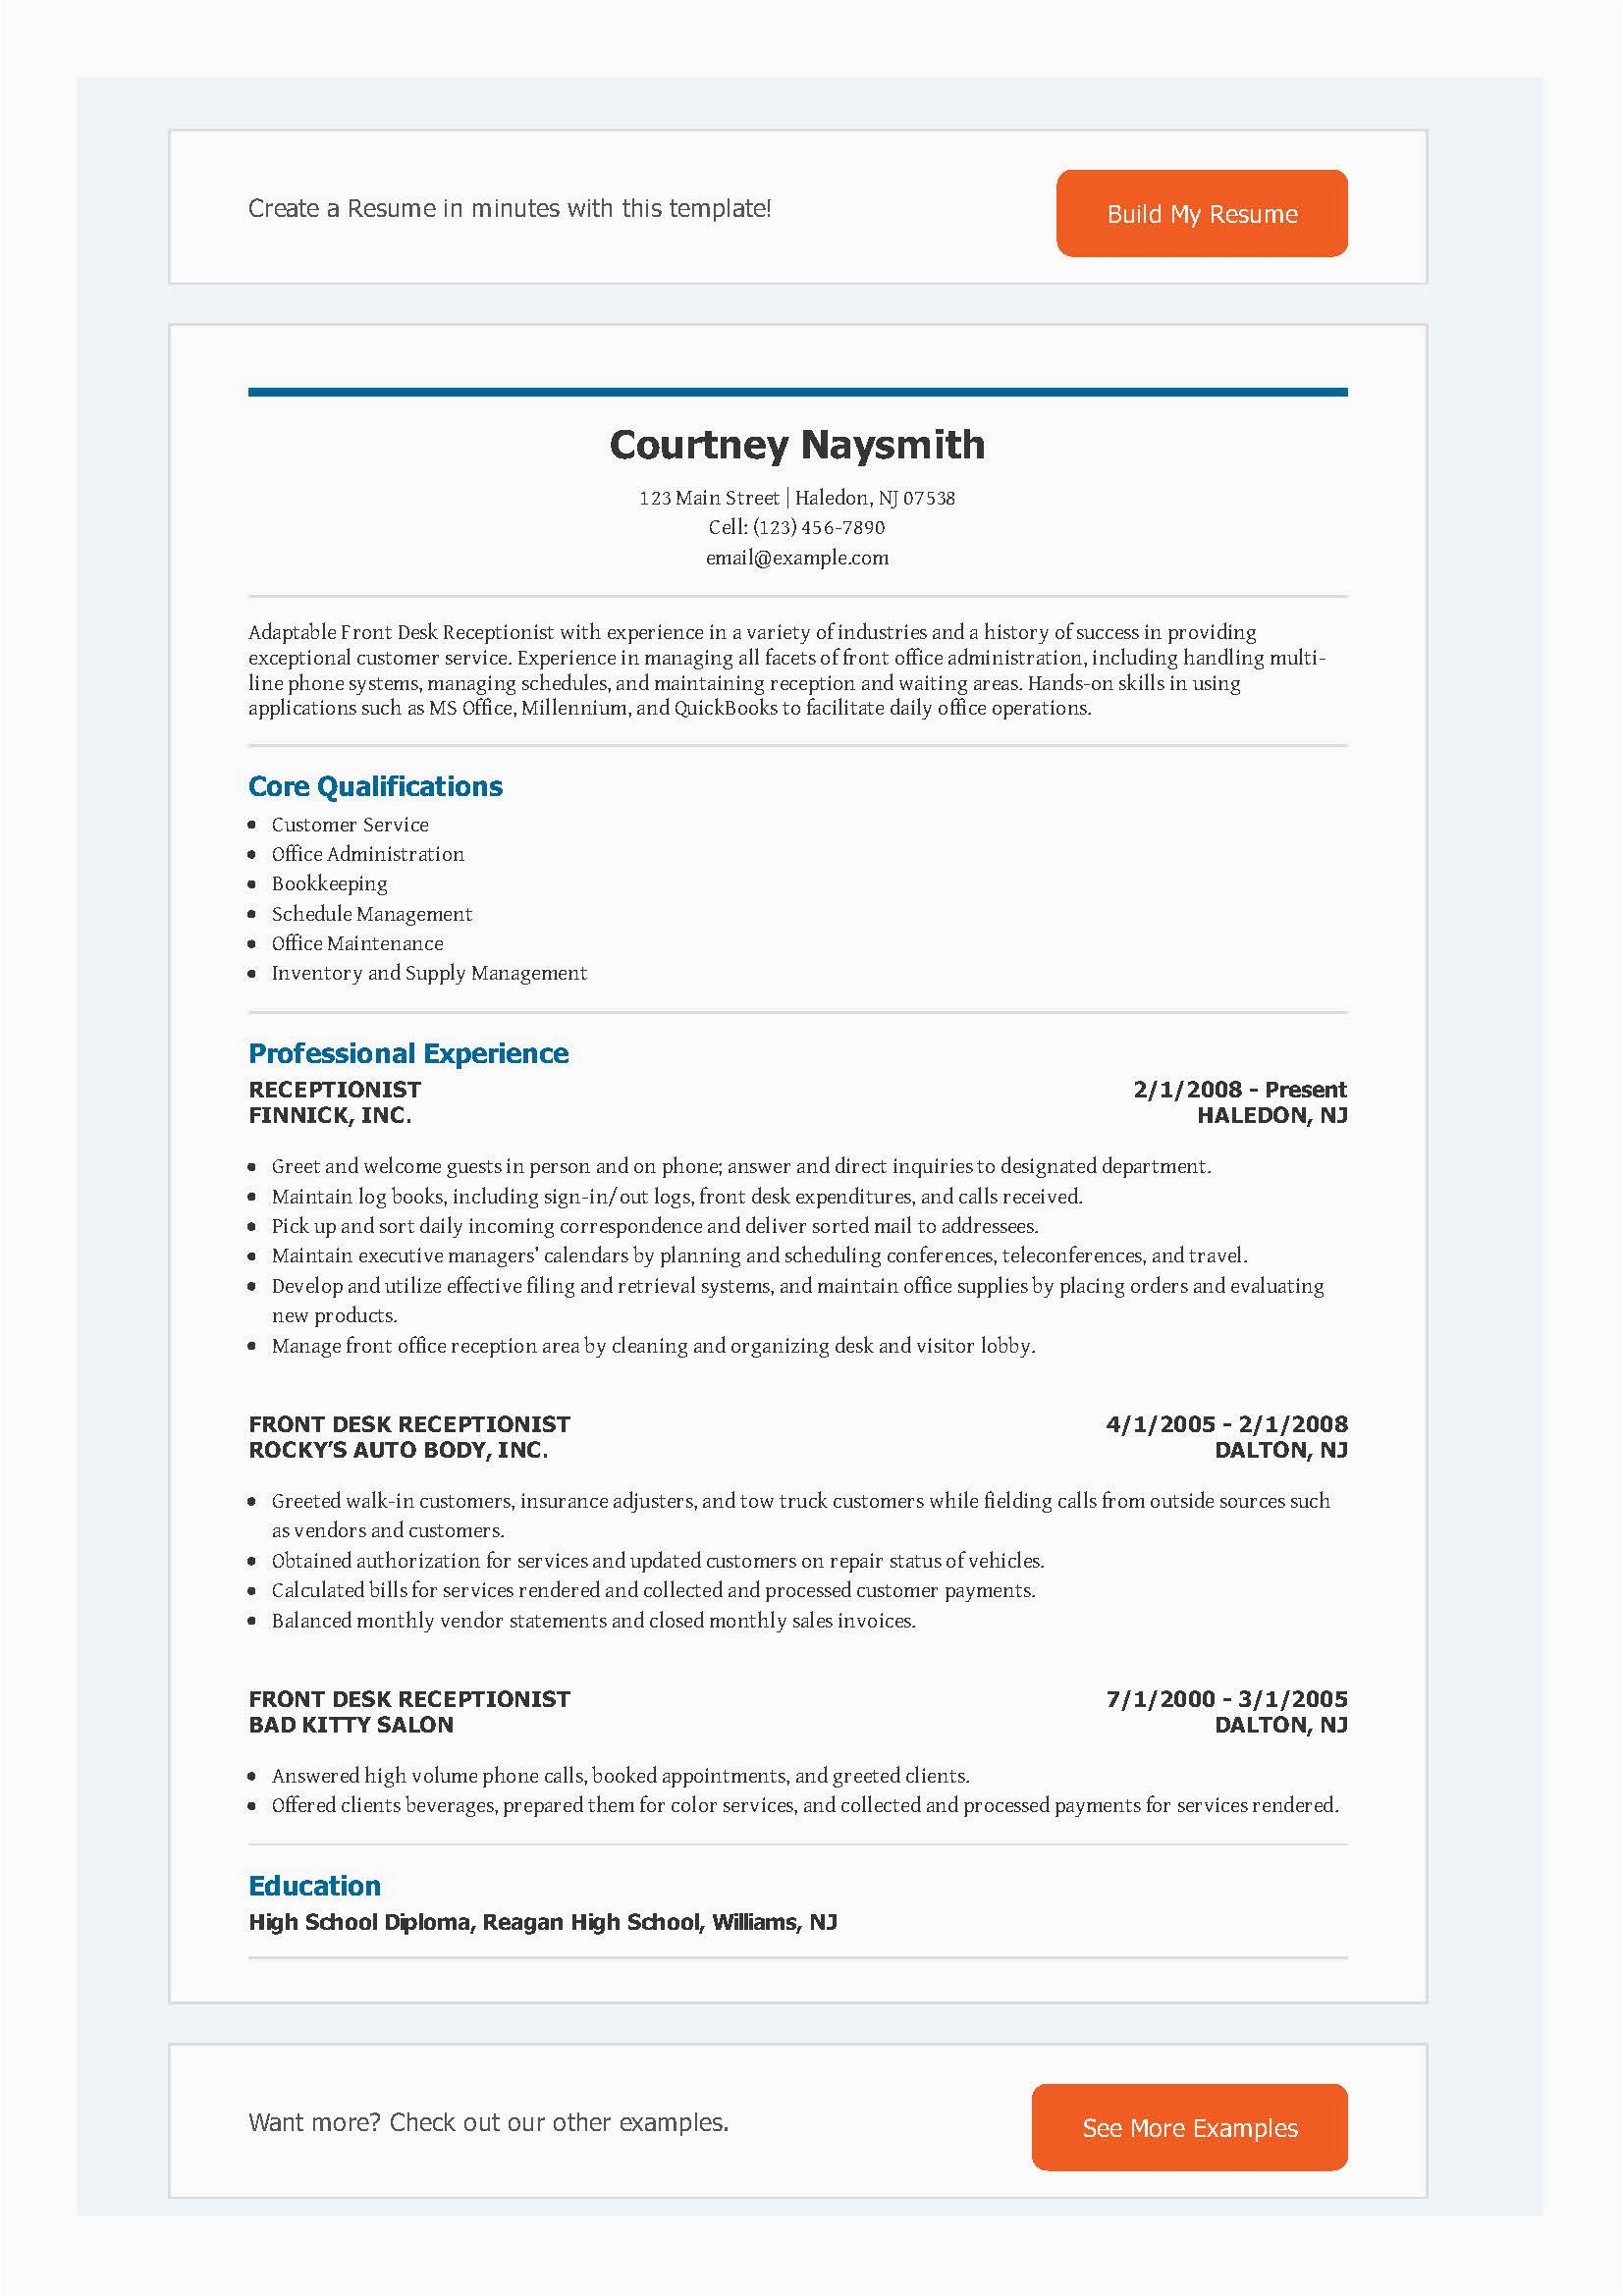 Sample Resume for Front Office Receptionist Front Fice Receptionist Resume Pdf format